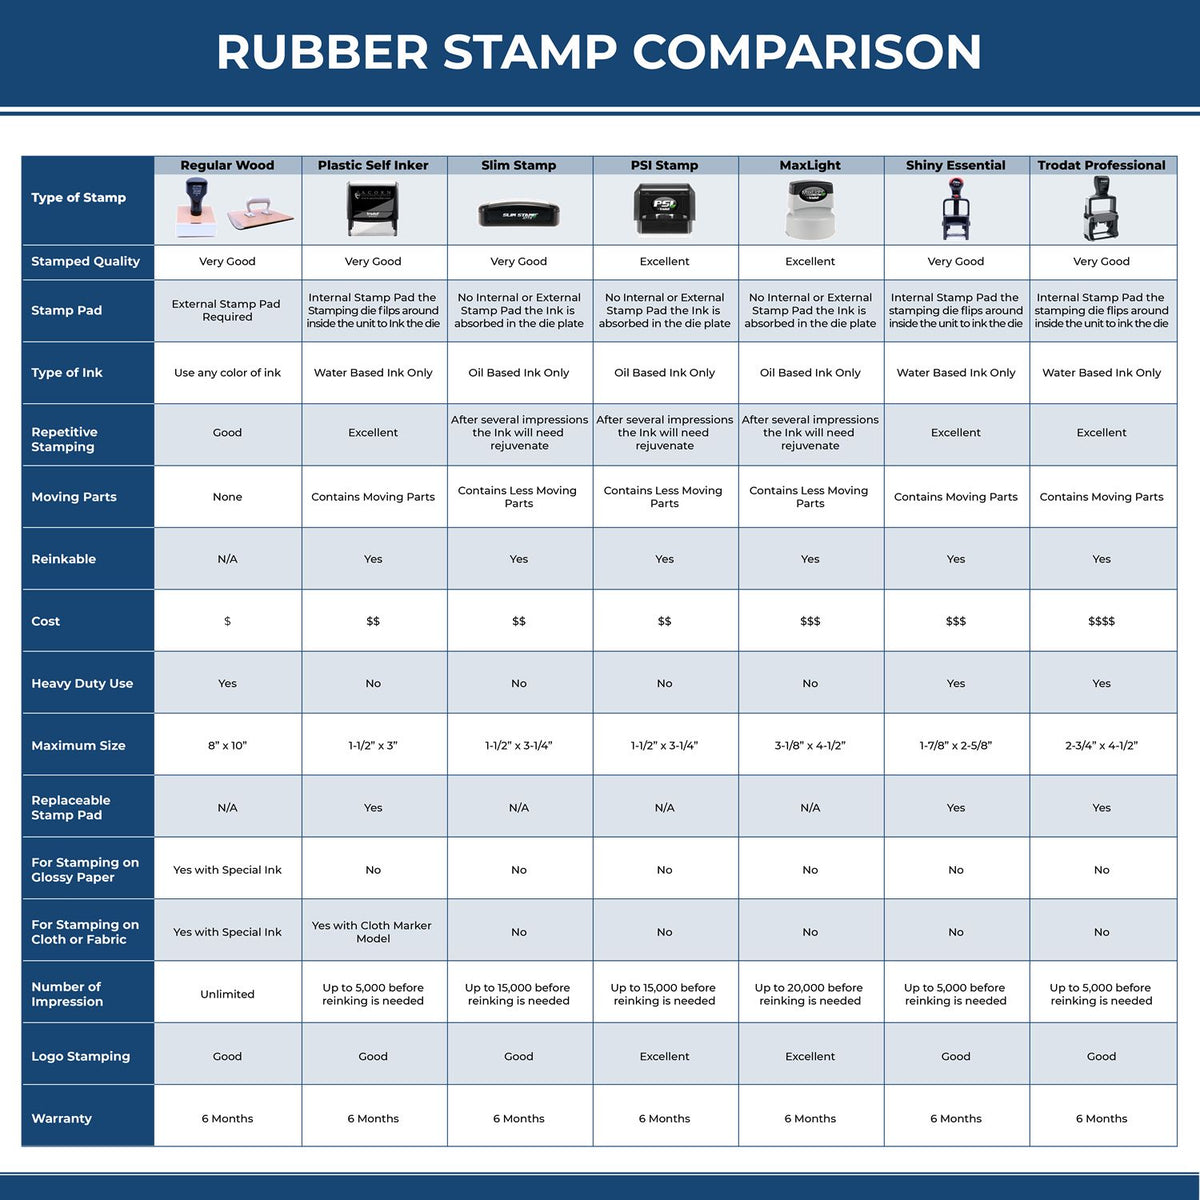 A comparison chart for the different types of mount models available for the Slim Pre-Inked Rectangular Notary Stamp for Puerto Rico.